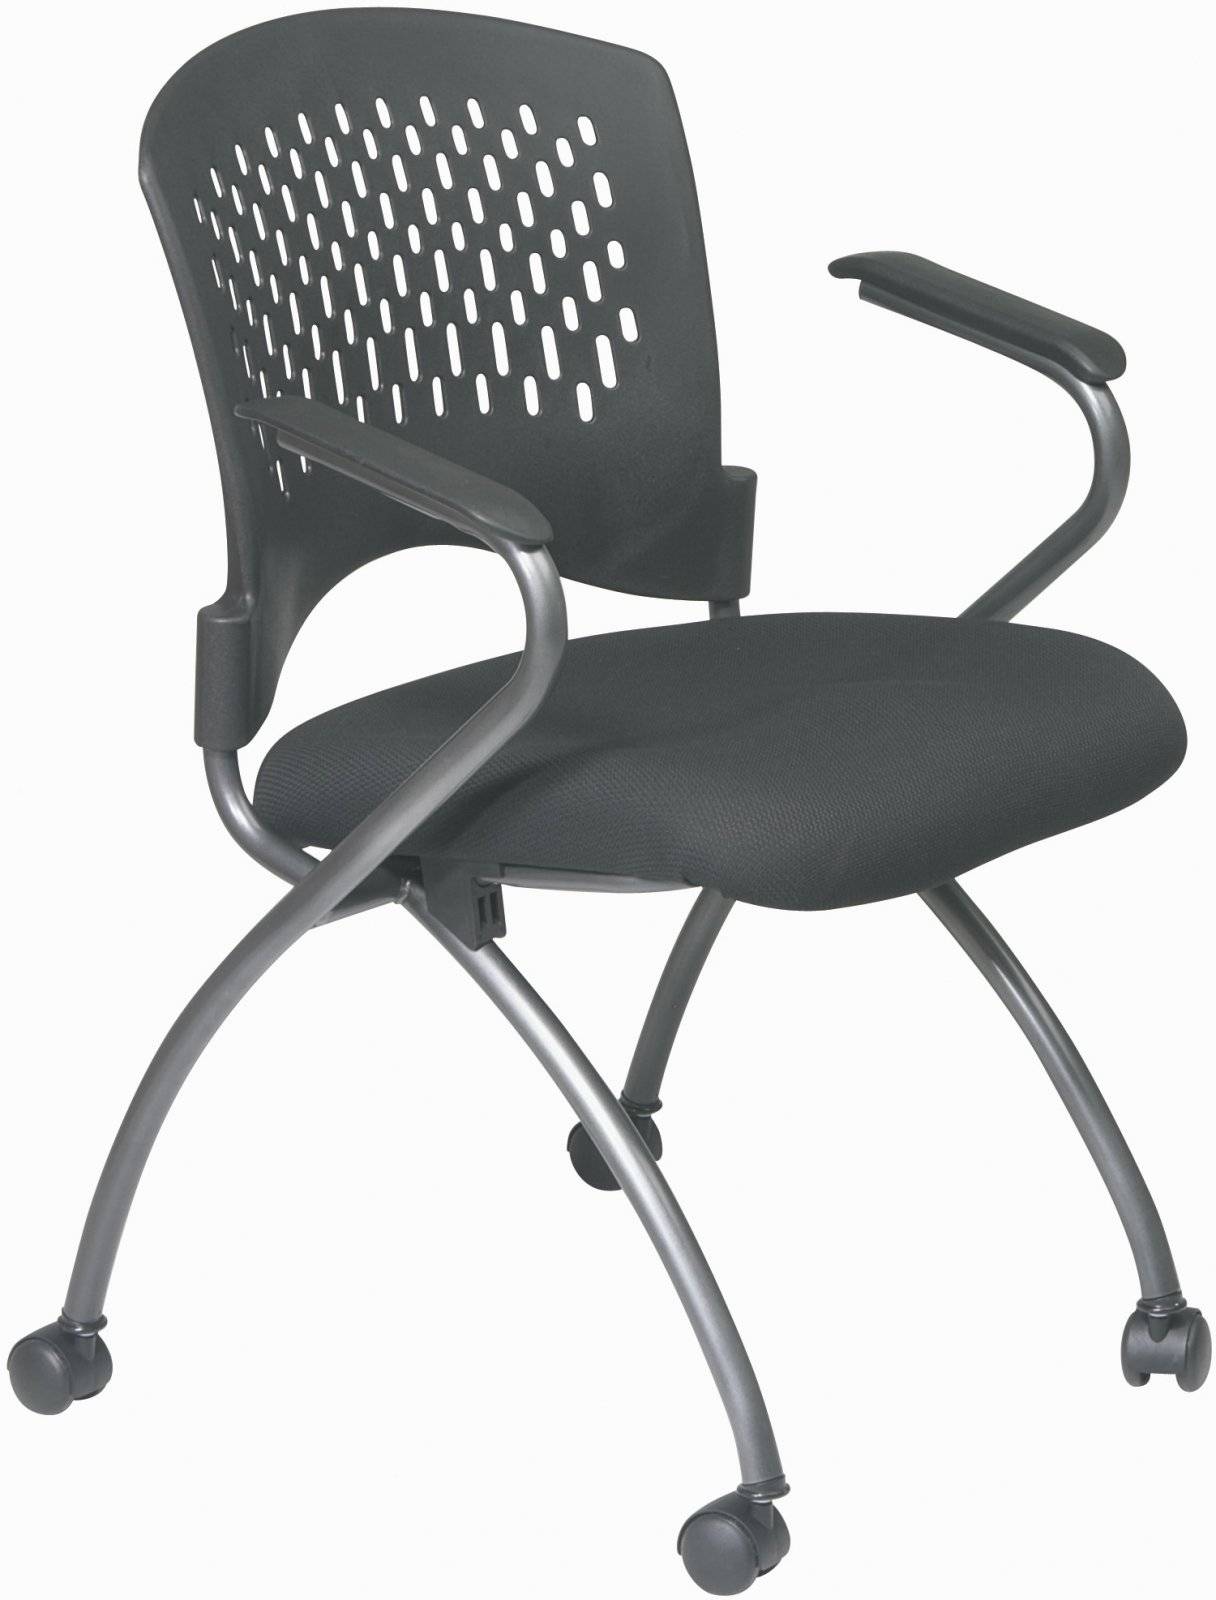 Ergonomic Folding Desk Chair - In this video i review the hbada